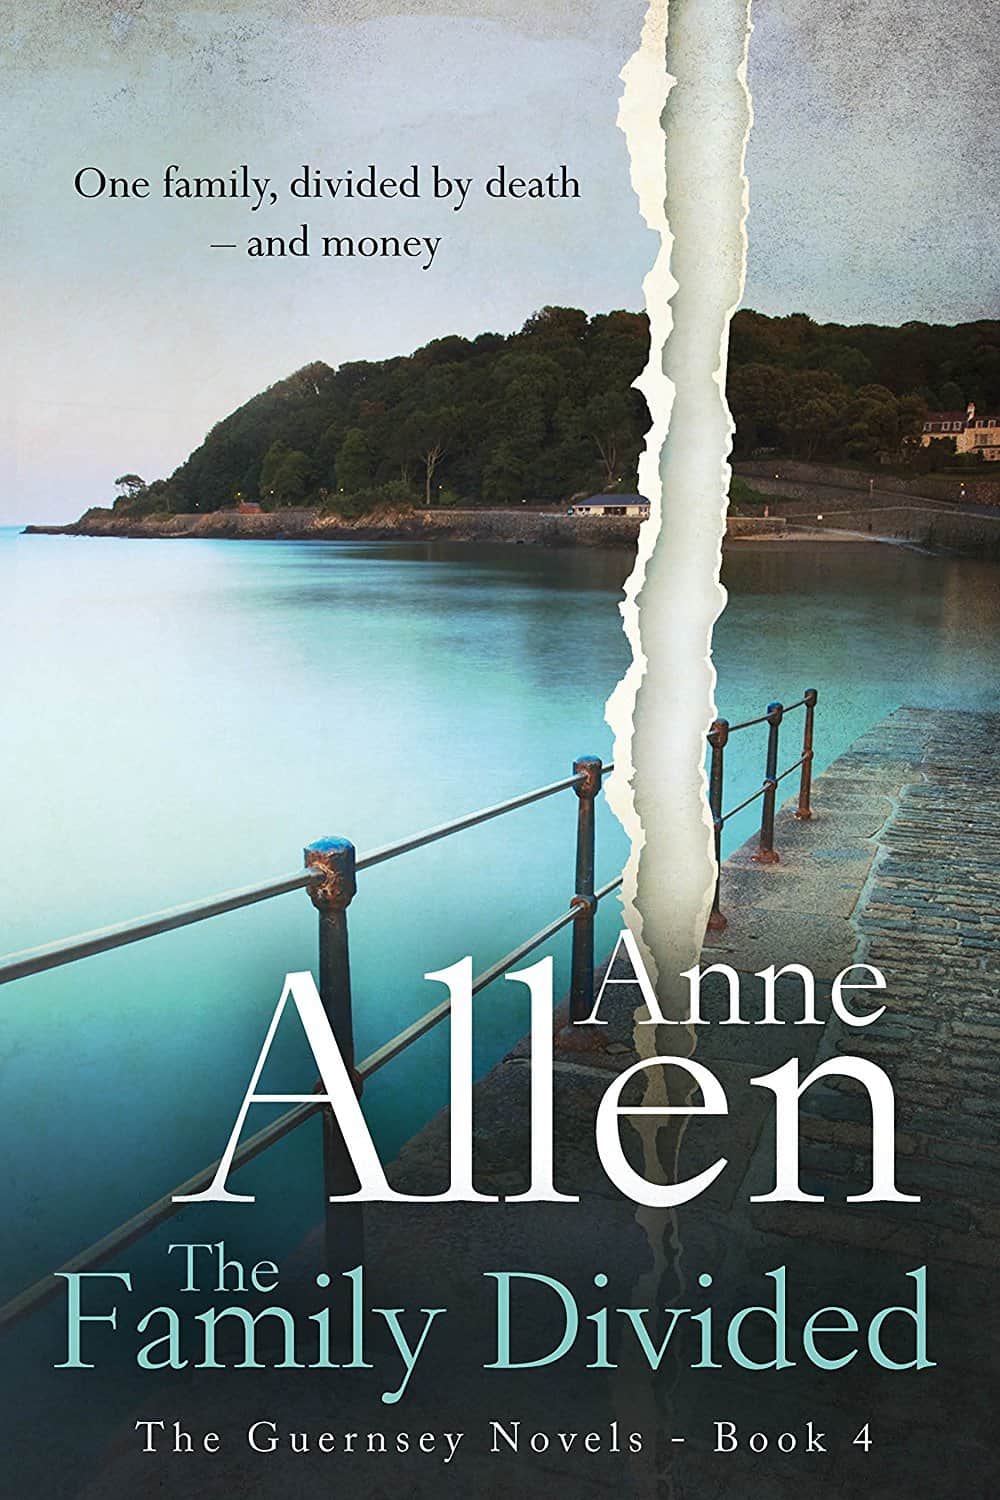 The Family Divided by Anne Allen